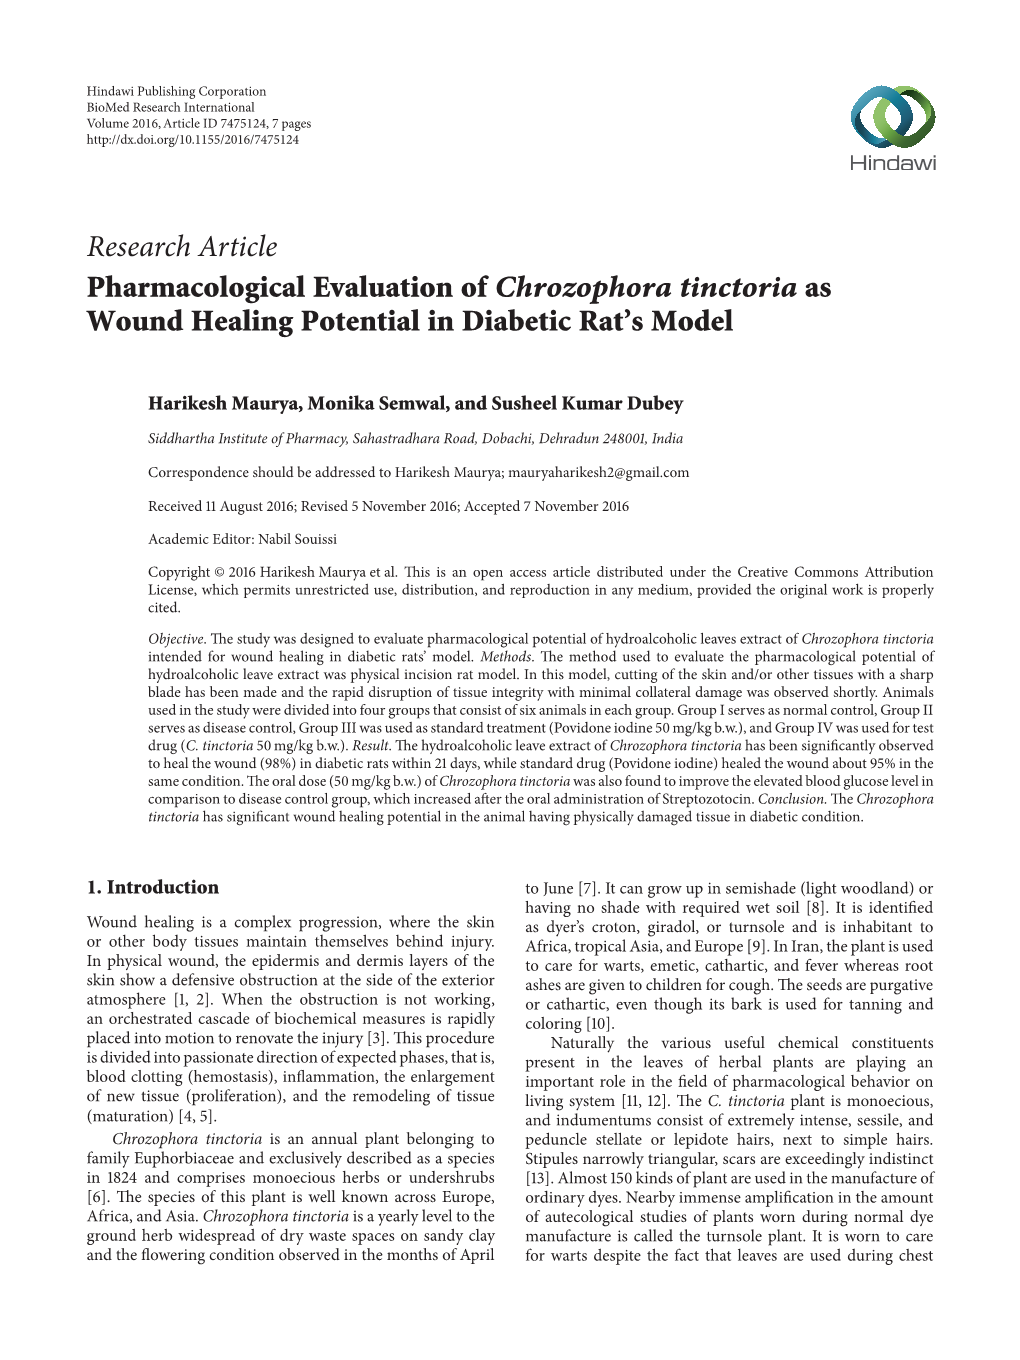 Research Article Pharmacological Evaluation of Chrozophora Tinctoria As Wound Healing Potential in Diabetic Rat’S Model